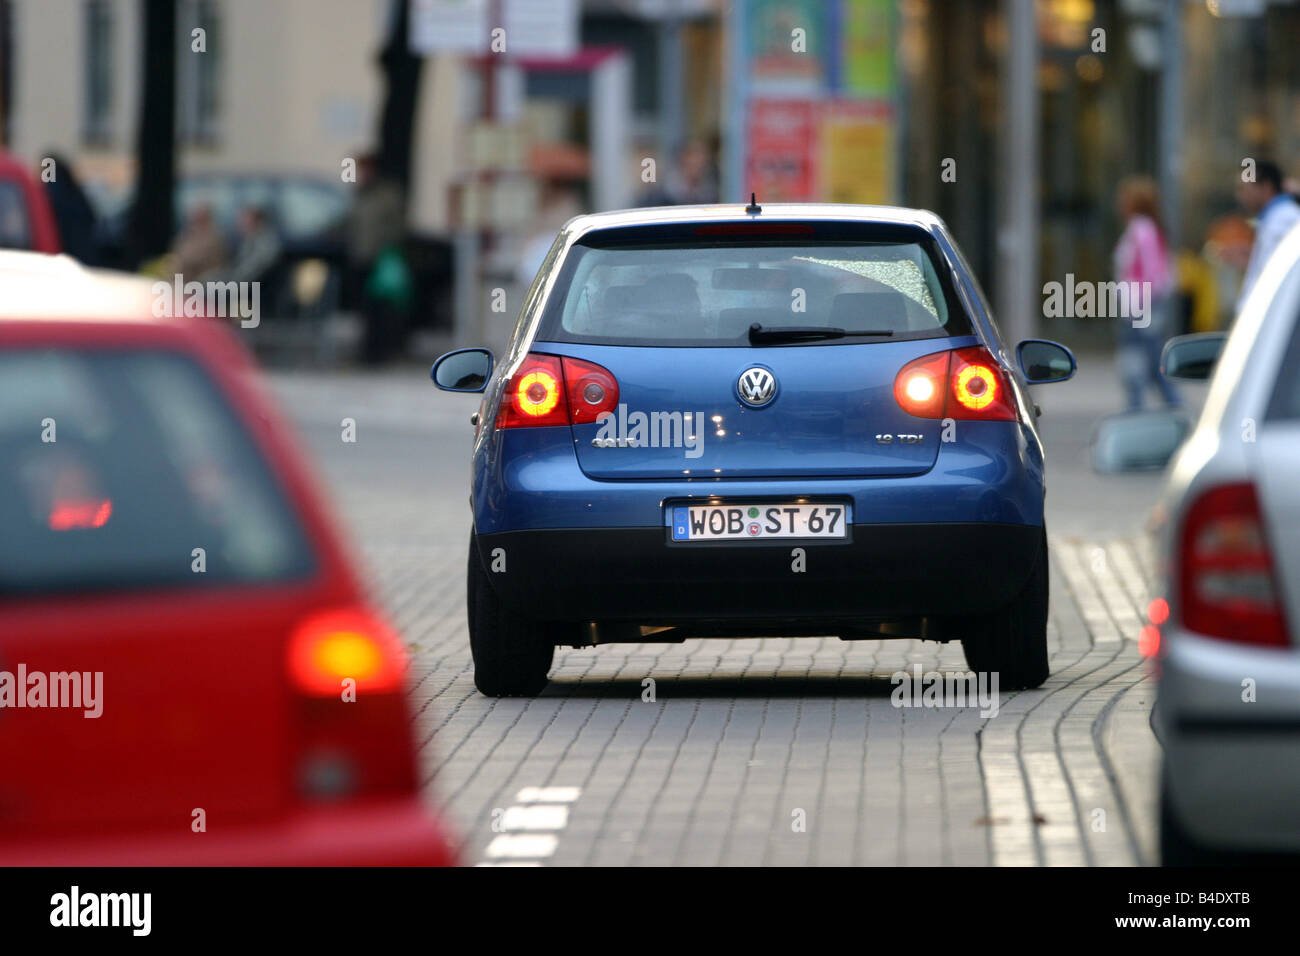 Car, VW Volkswagen Golf V 1.9 TDI, Lower middle-sized class, model year 2003-, metallic-blue, Limousine, FGHDS, standing, uphold Stock Photo